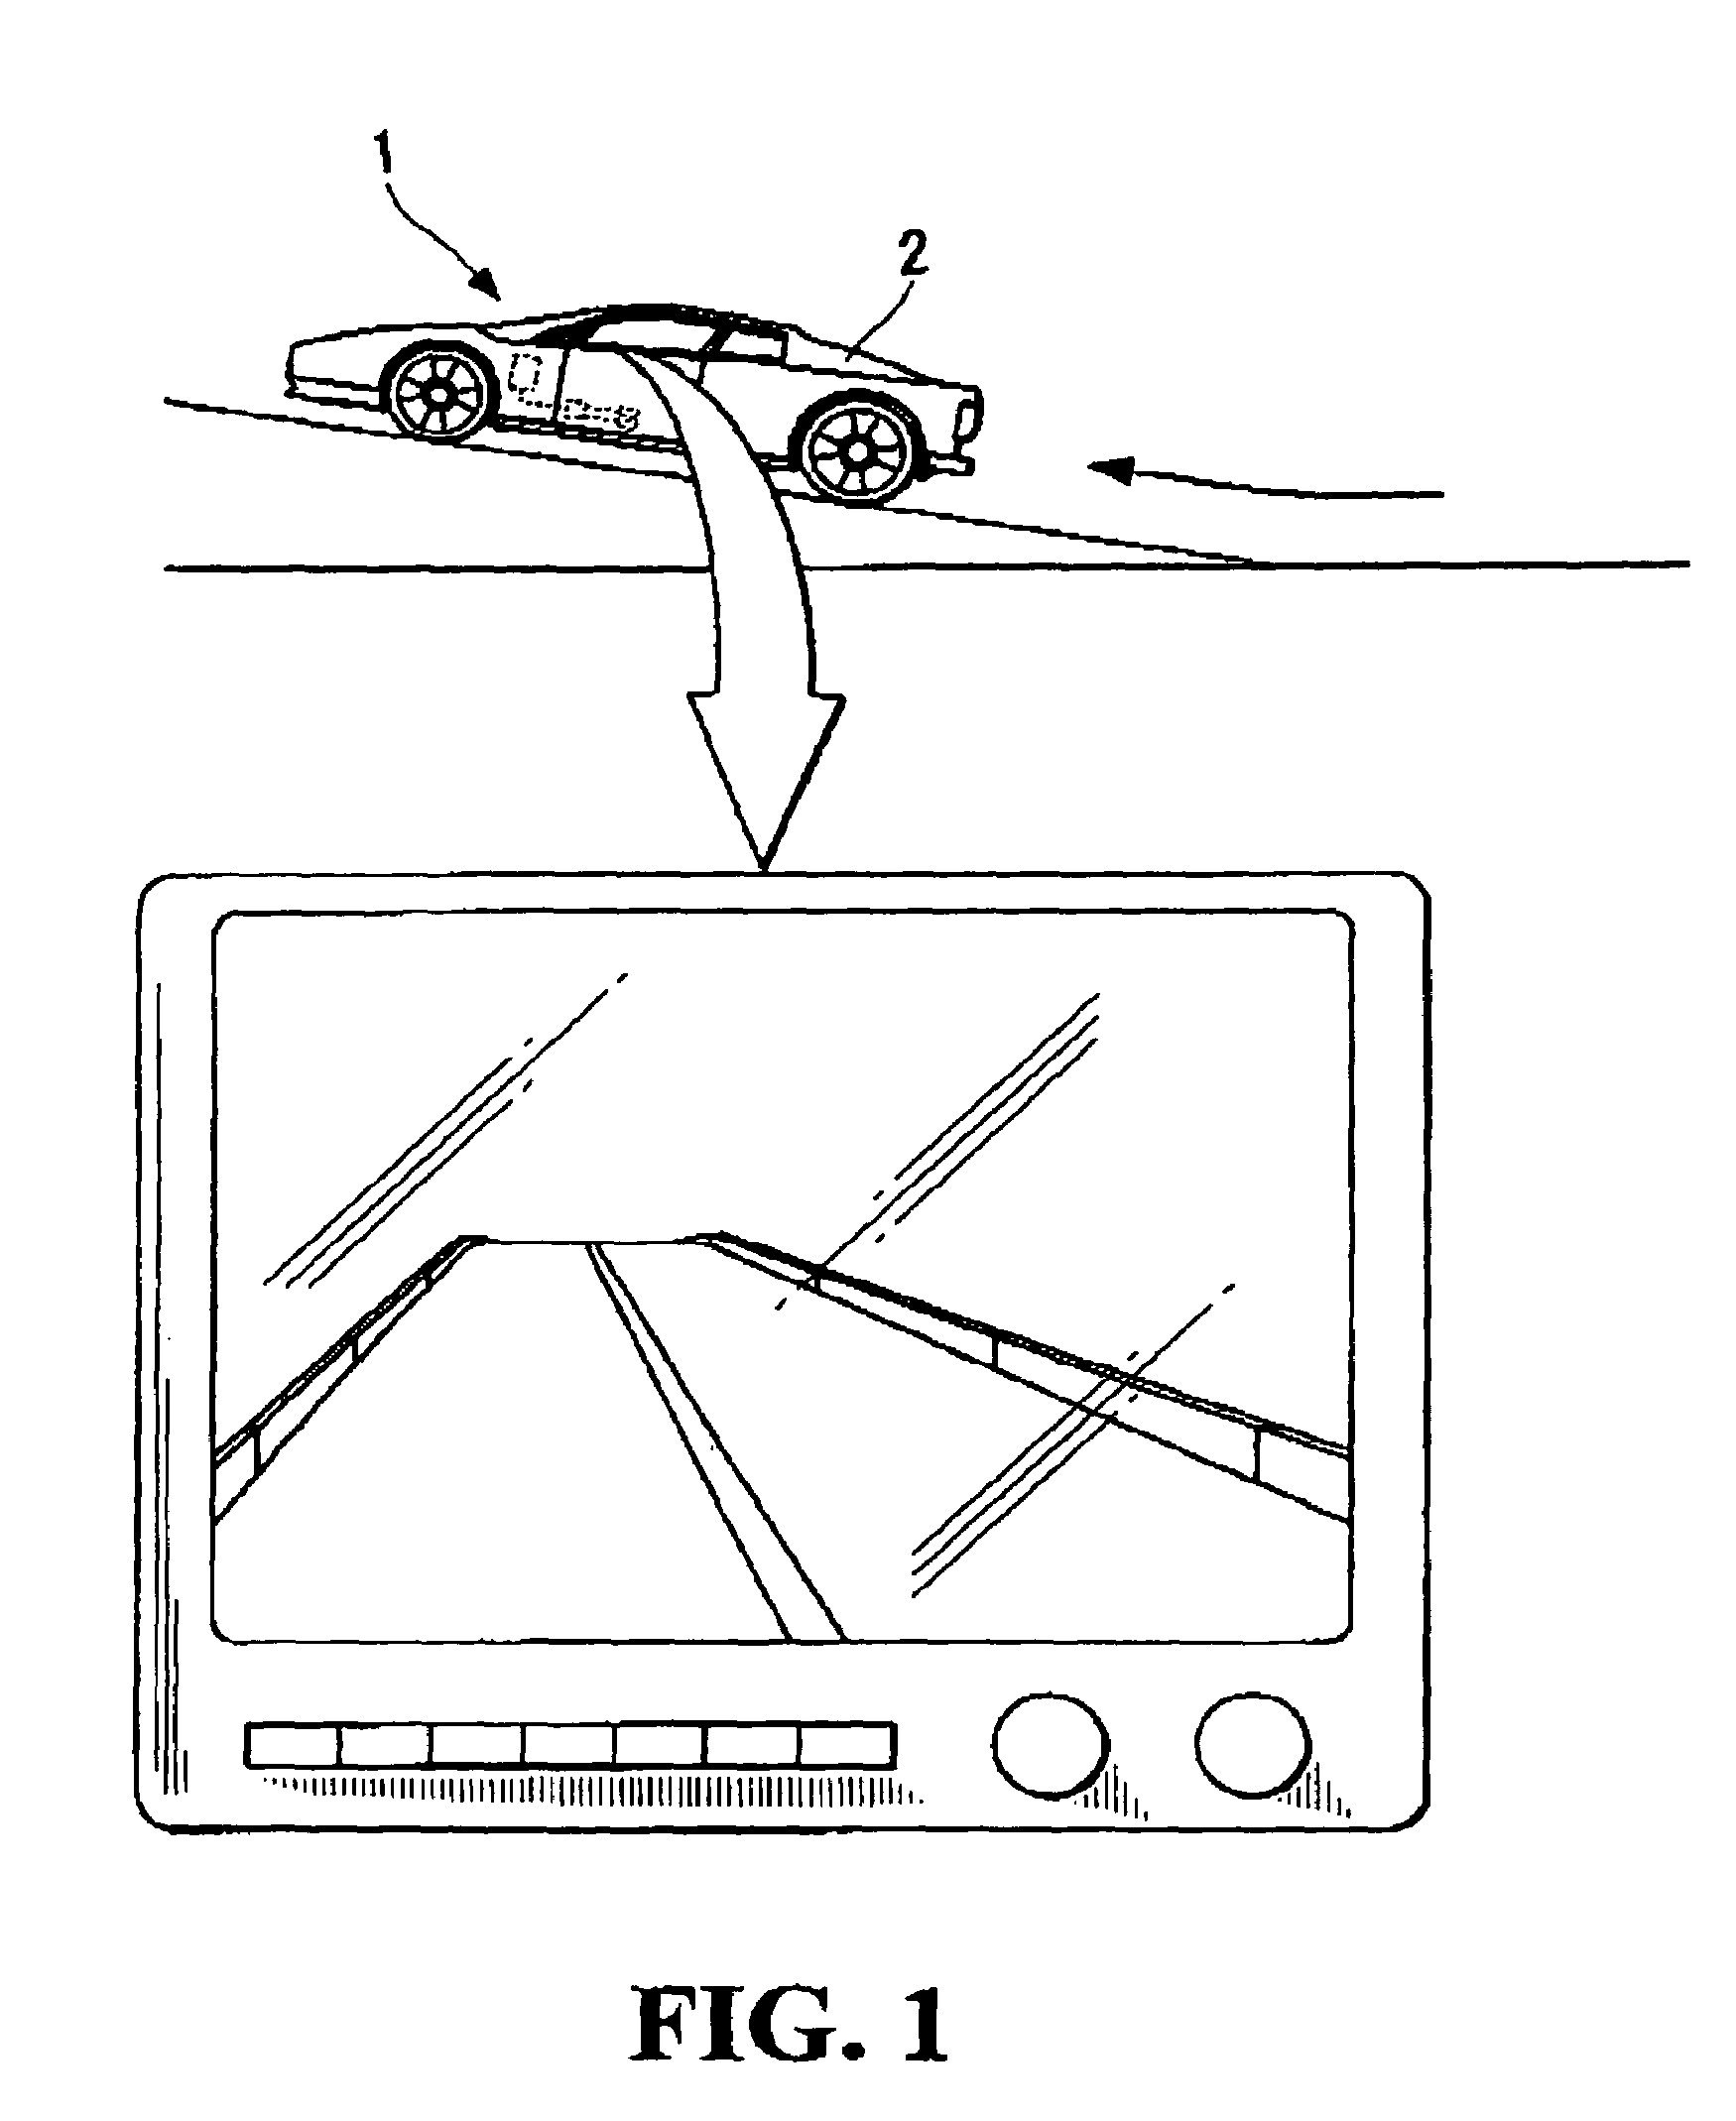 Device for detecting slope of vehicle or the like